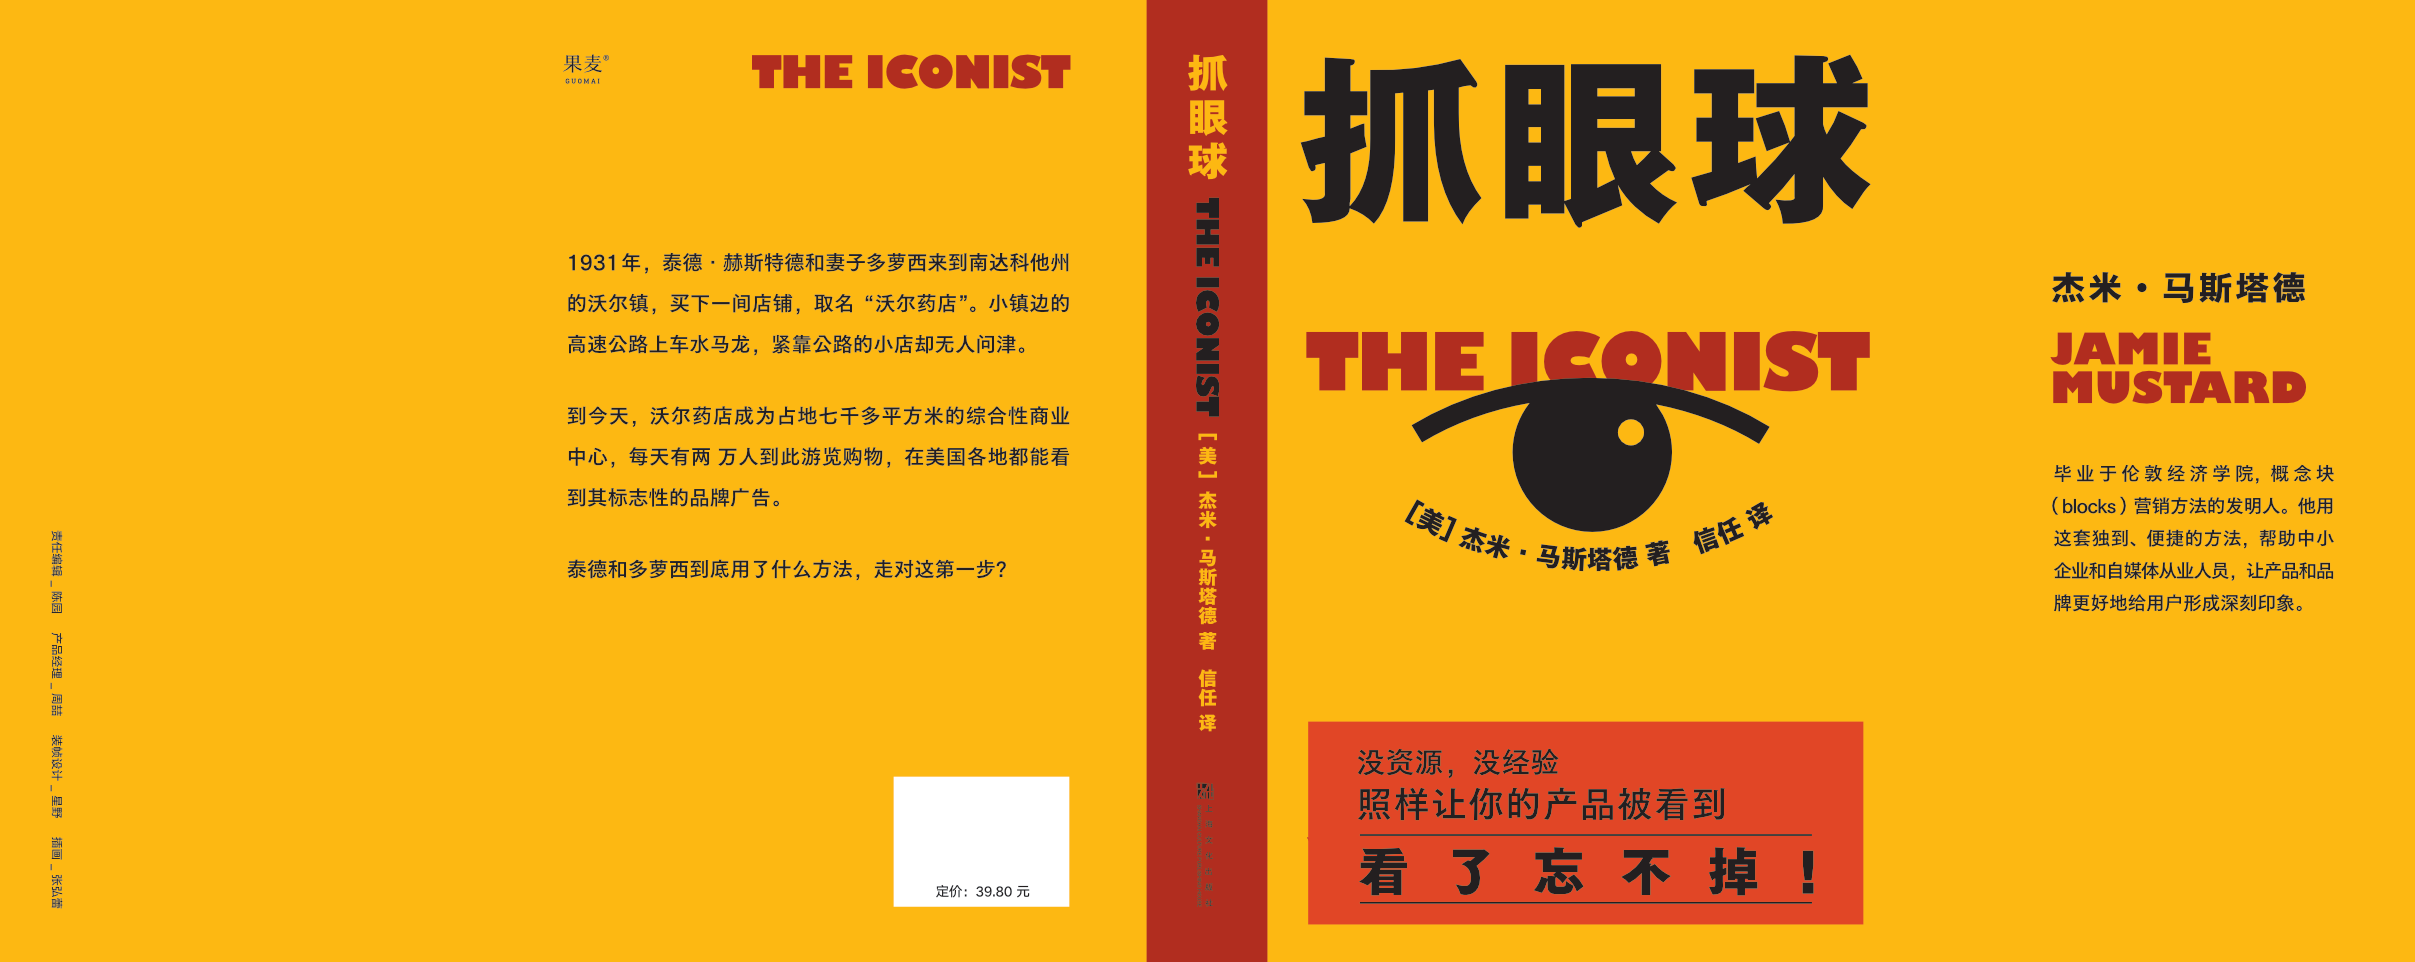 Chinese Cover for The Iconist Book